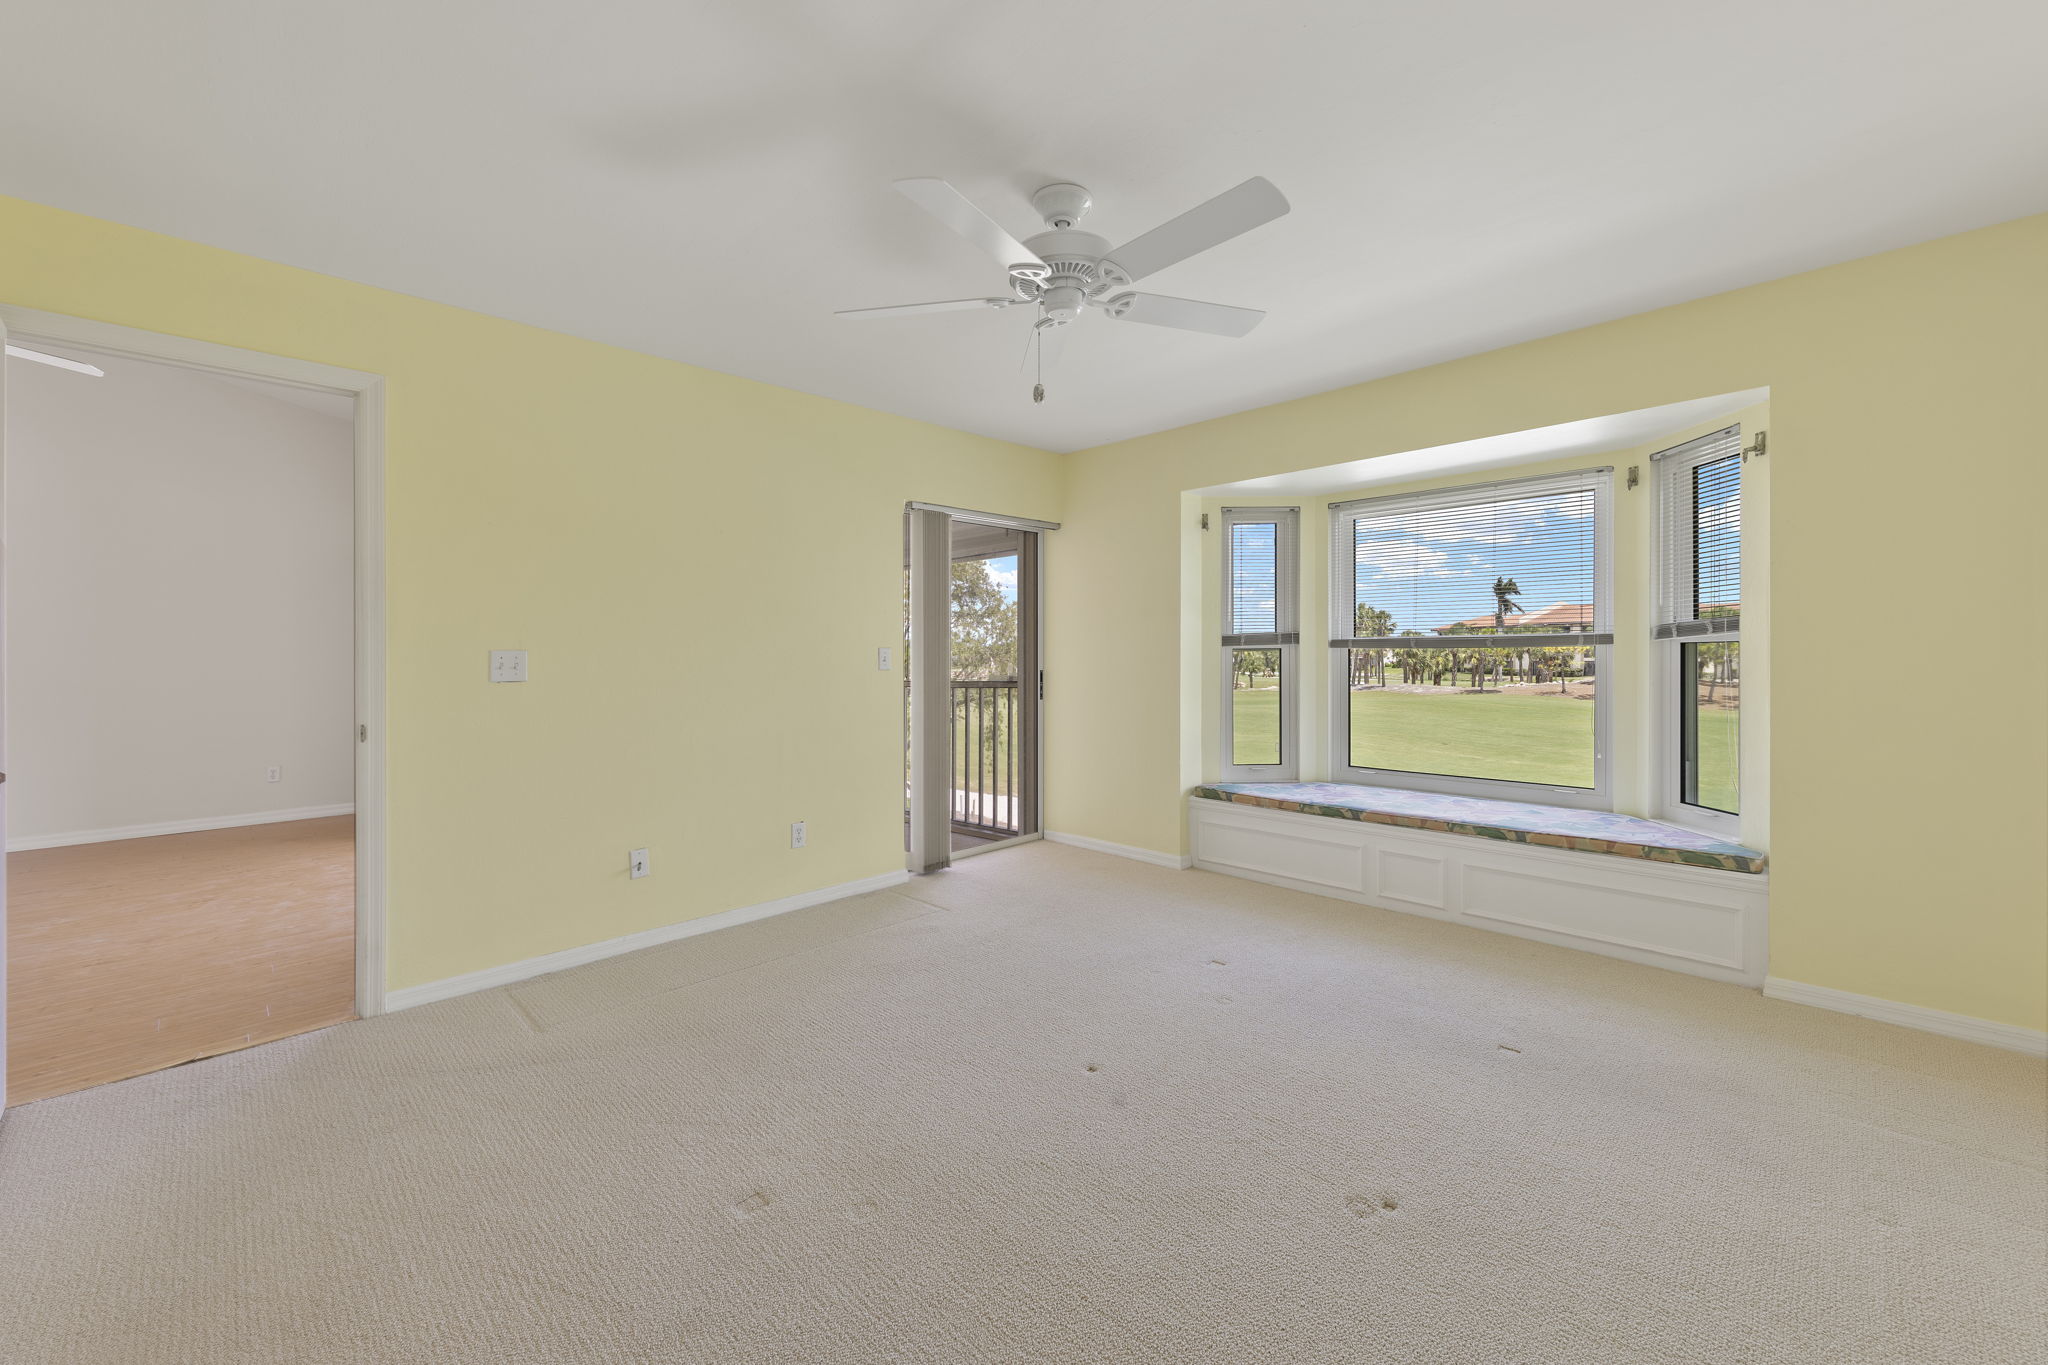 Primary Bedroom 1-2 Virtual Staging